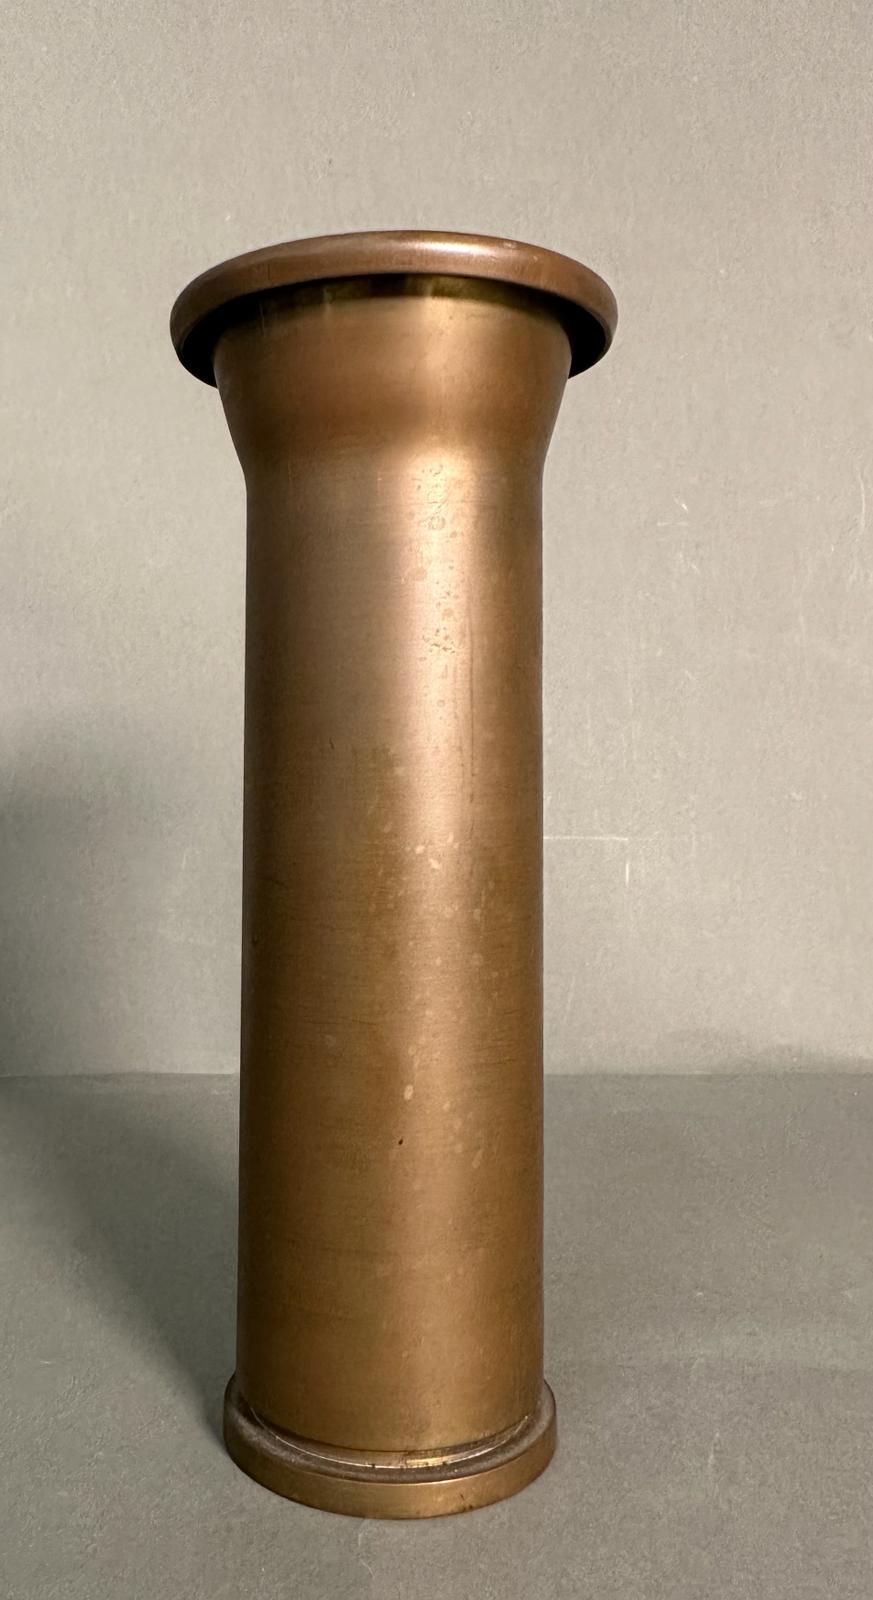 A trench art shell in the form of a vase - Image 4 of 4